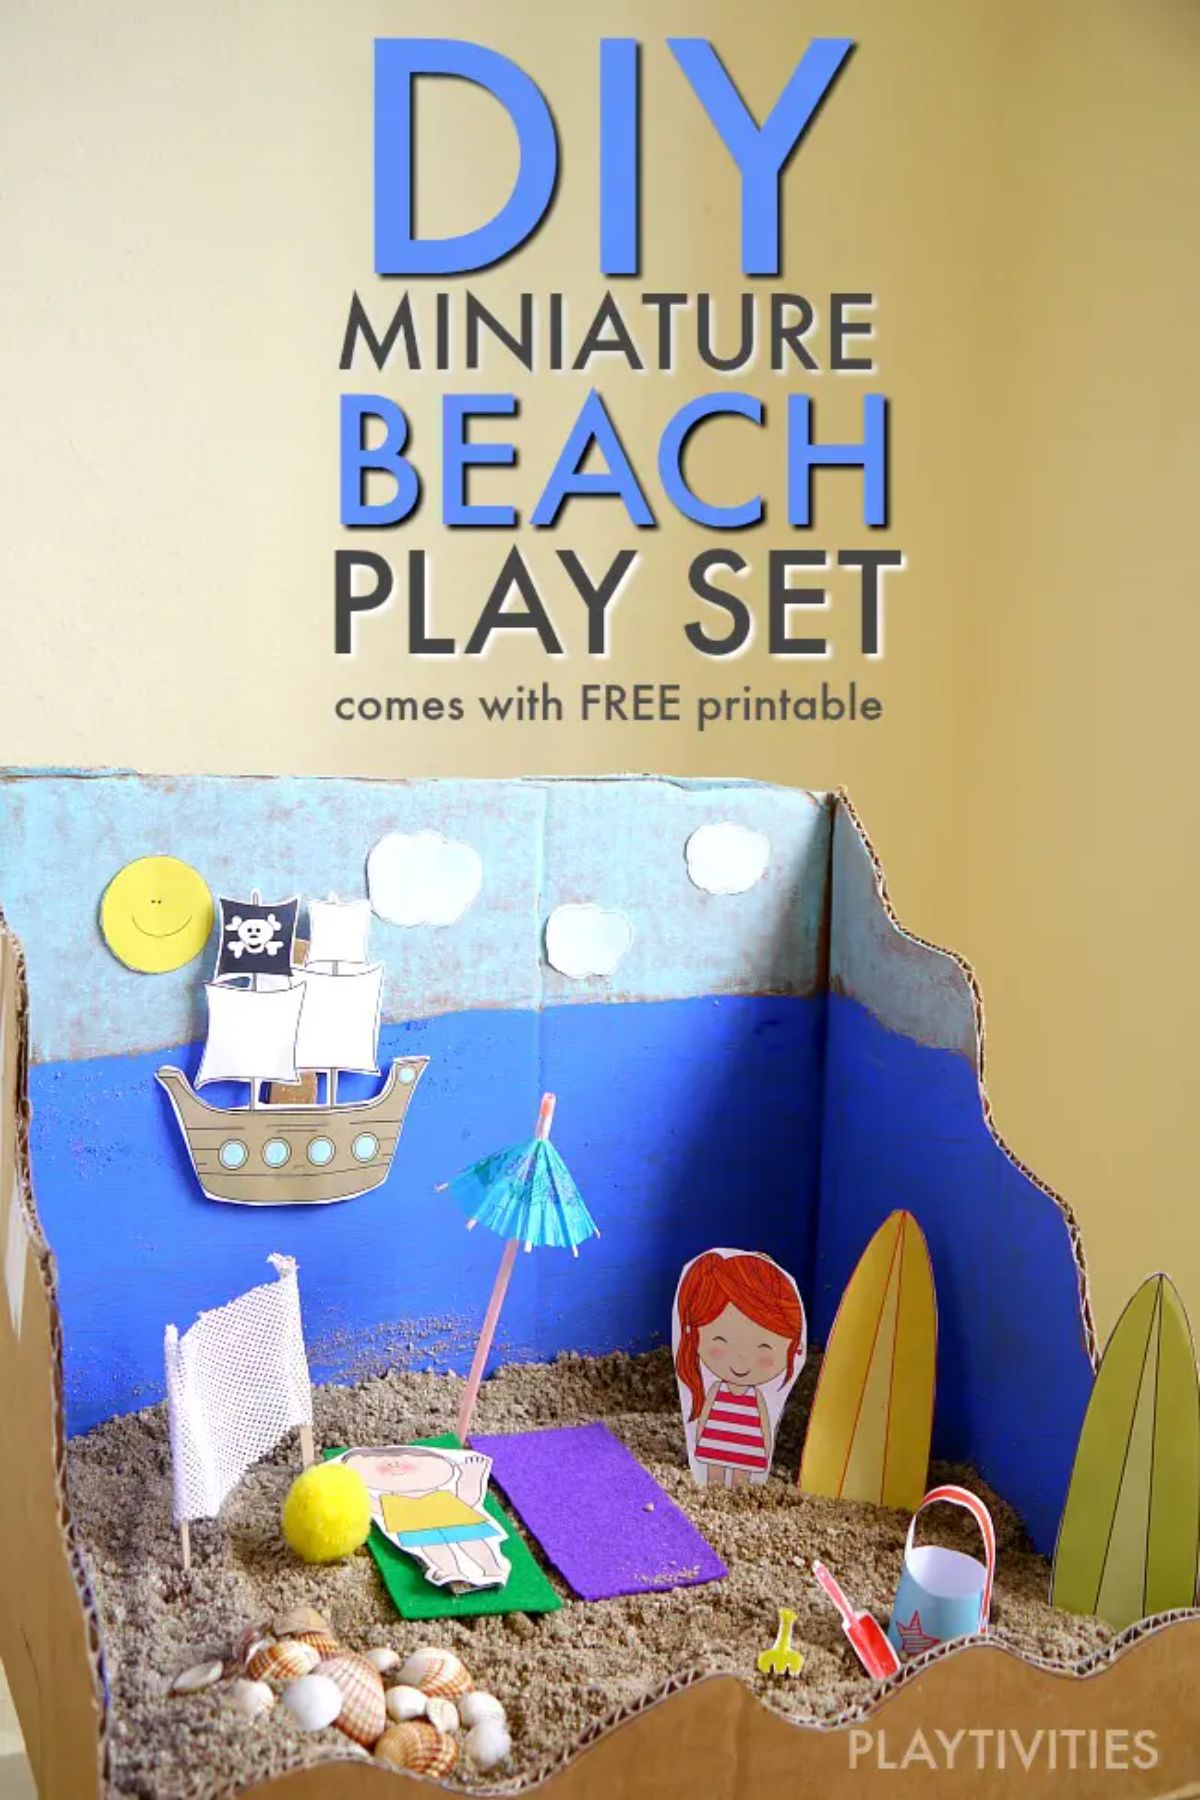 The text reads "DIY Miniature Beach Play Set comes with FREE printable" the image is off a beach scene made out of a cardboard box